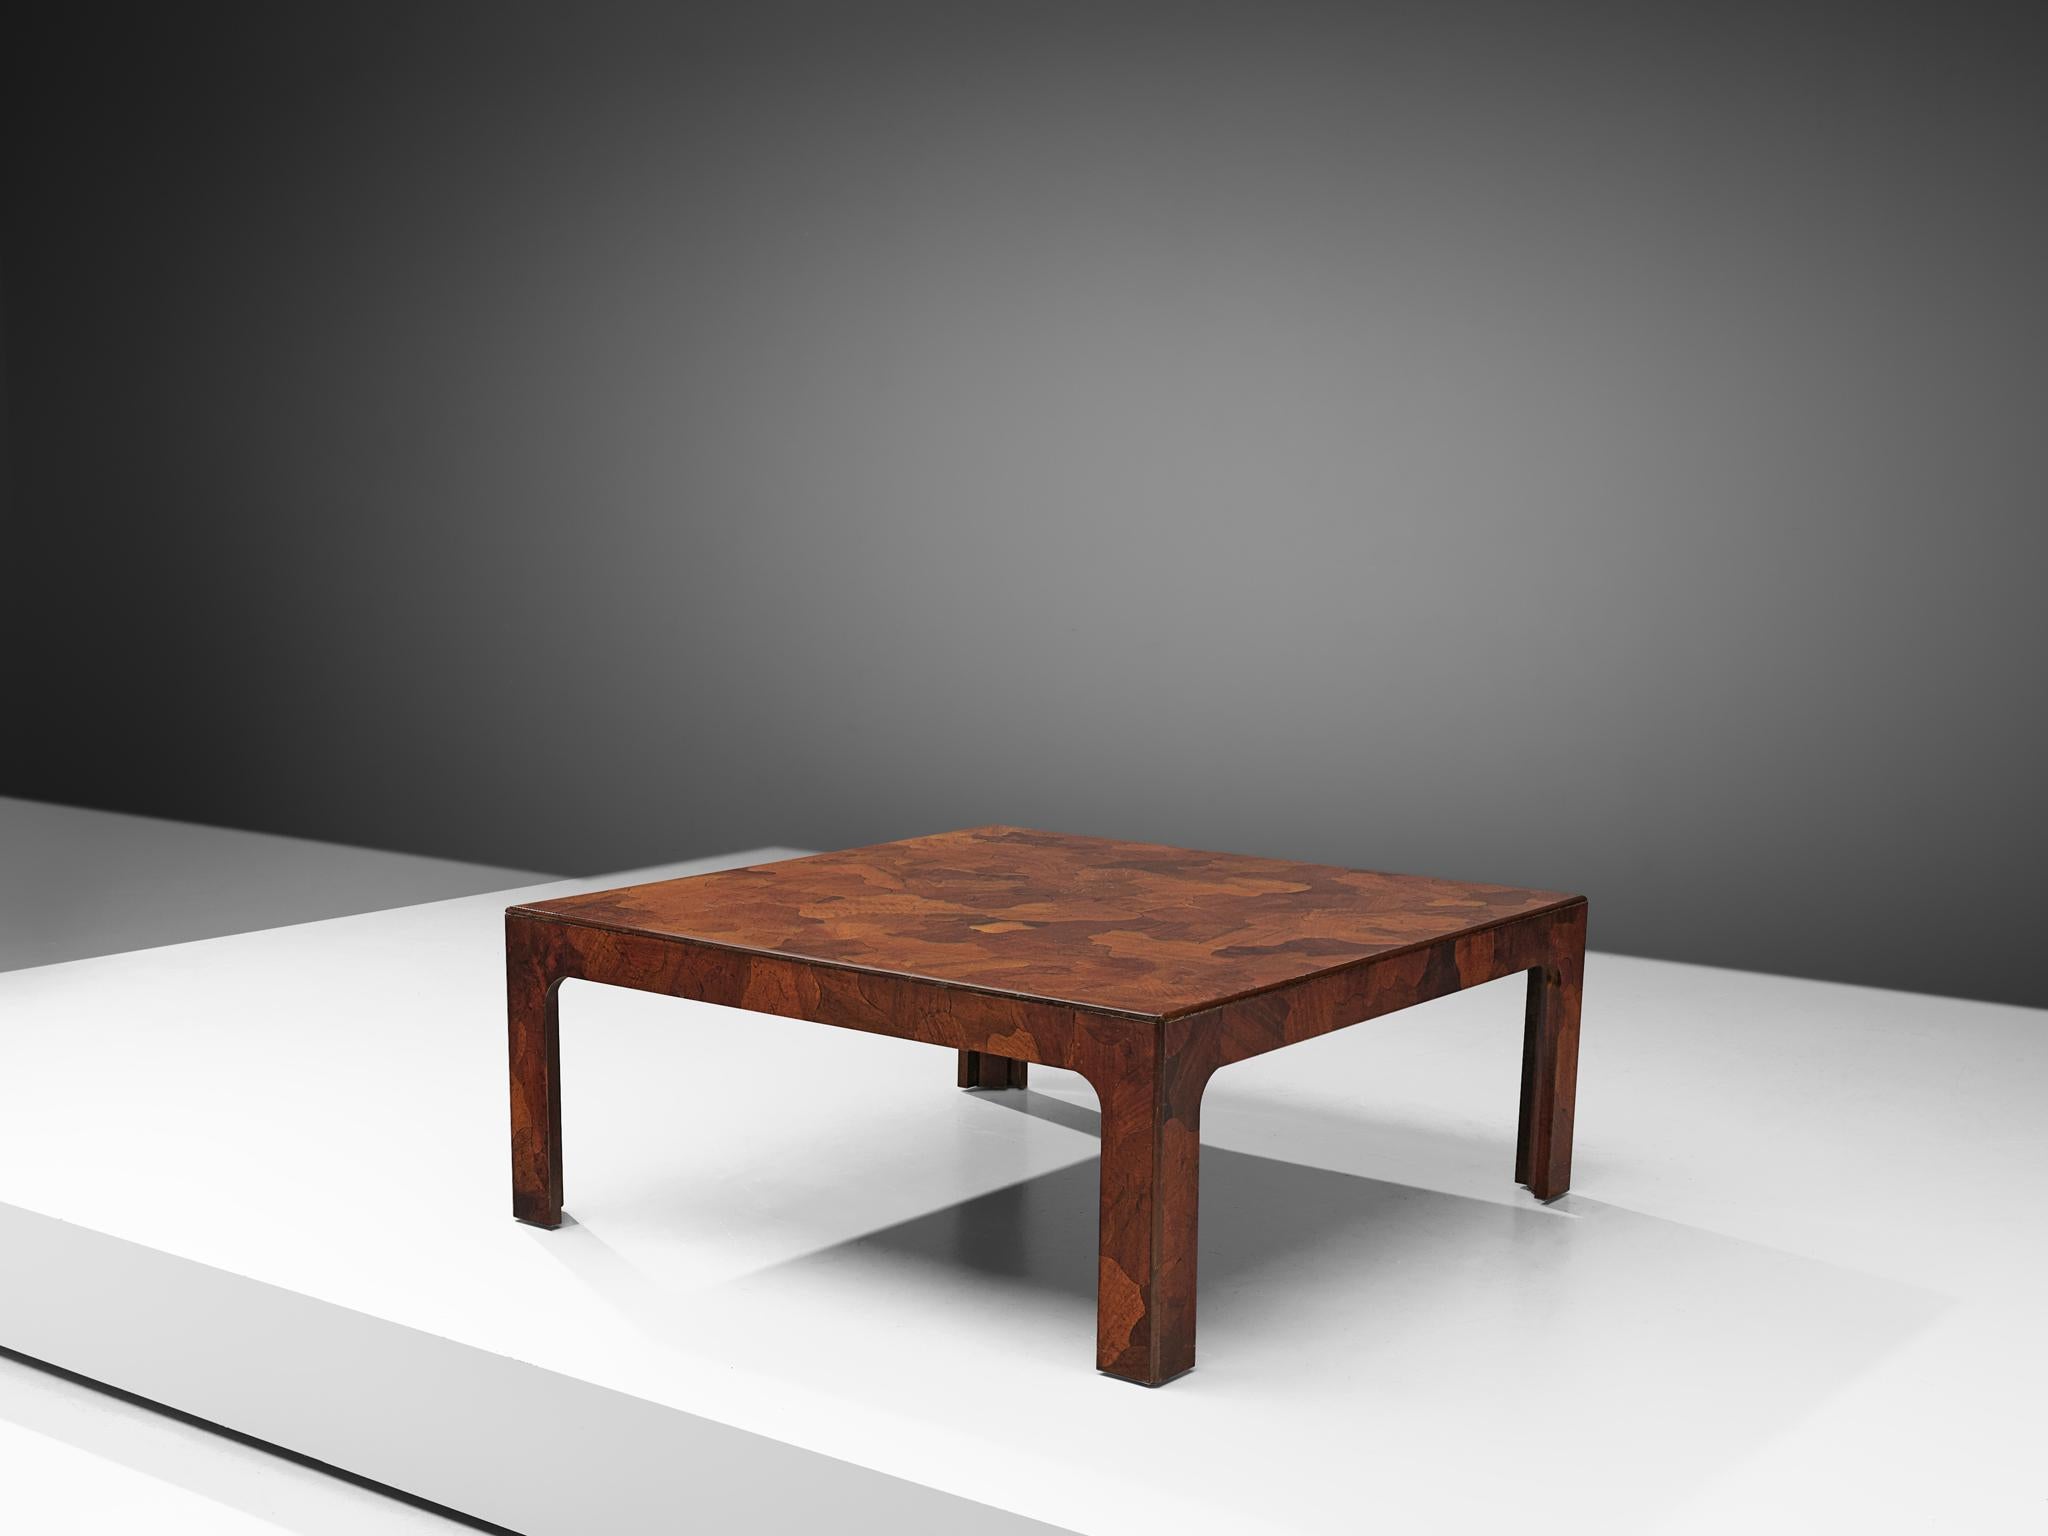 Coffee table, American walnut, United States, 1960s

Well designed rectangular coffee table inlayed with organic shaped pieces of American walnut that show a variety of tones. The coffee table is executed with two rectangulars on top of one another,